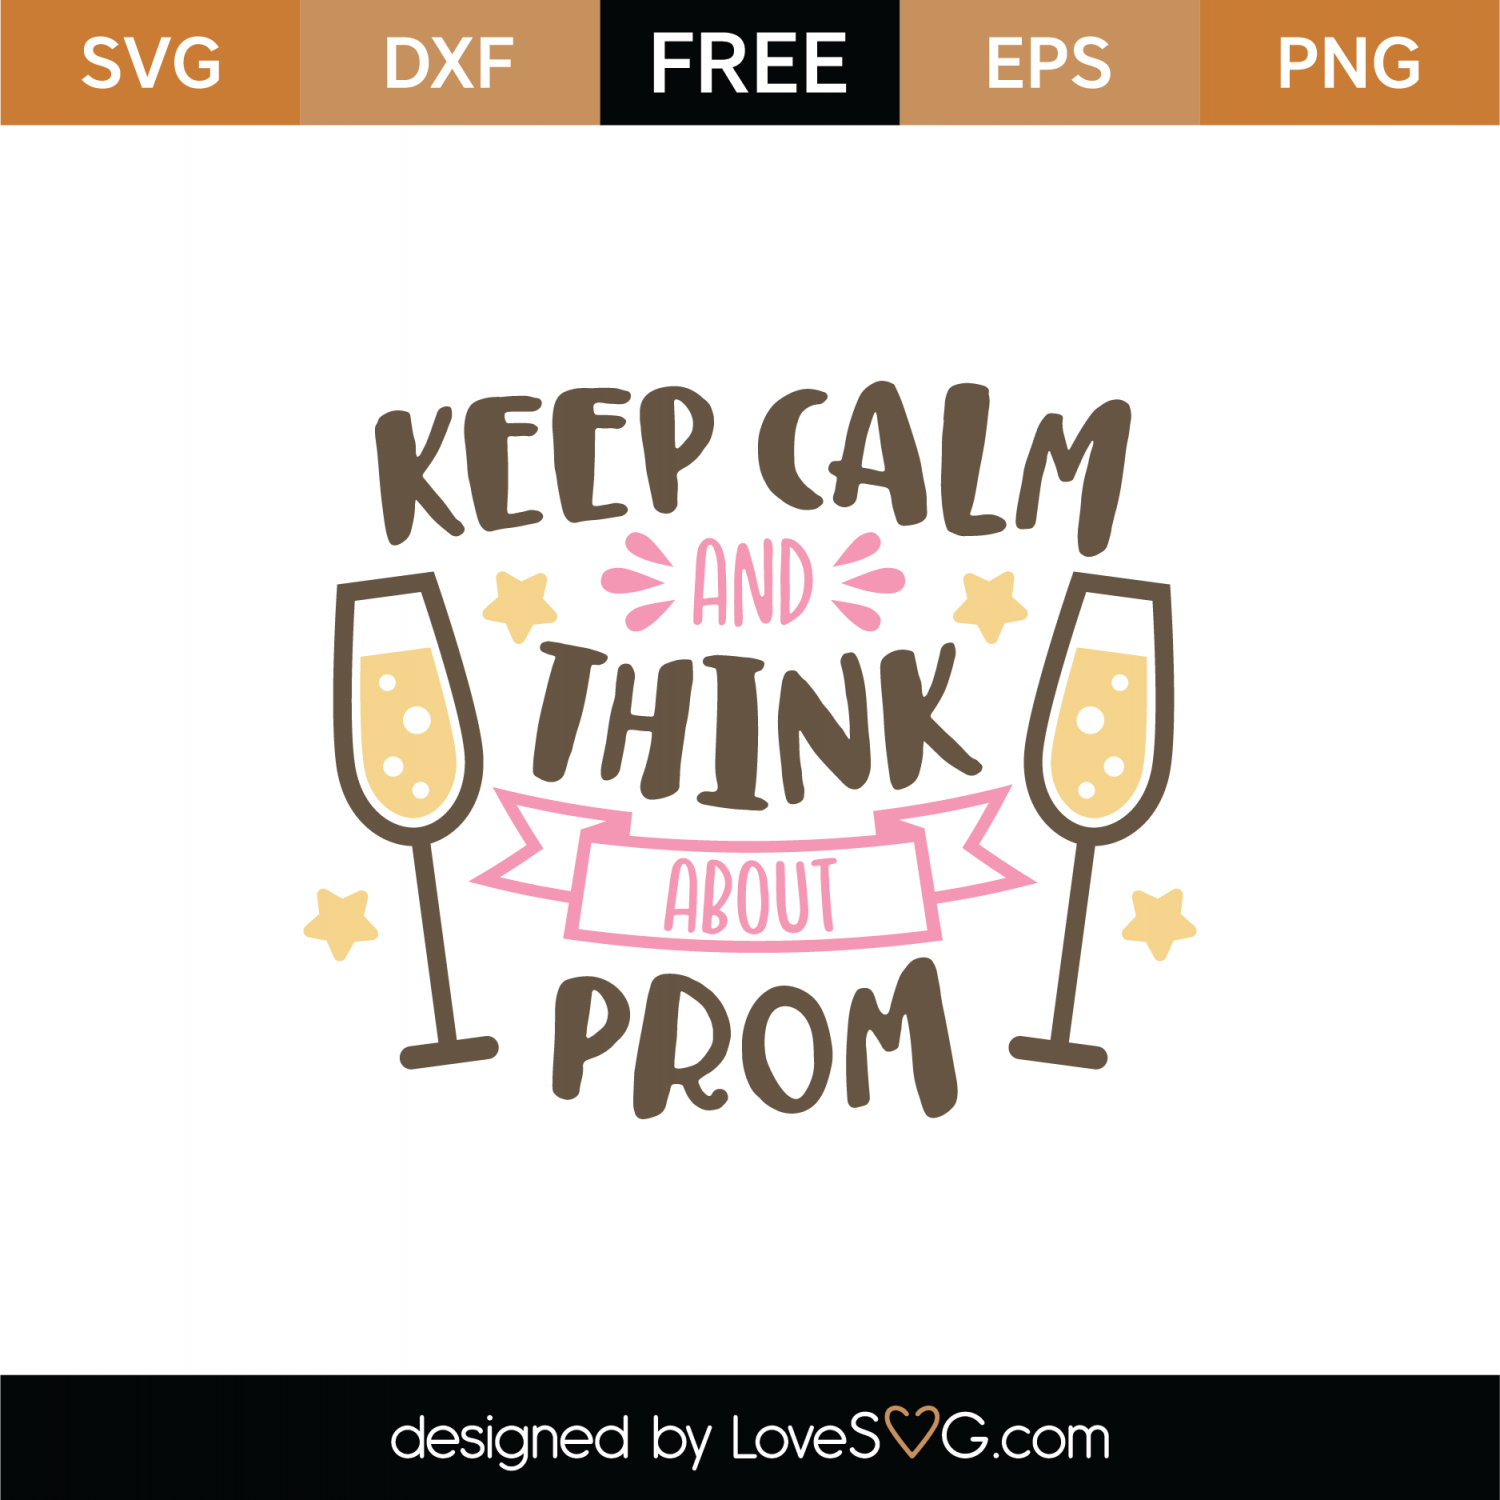 Download Free Keep Calm & Think About Prom SVG Cut File | Lovesvg.com